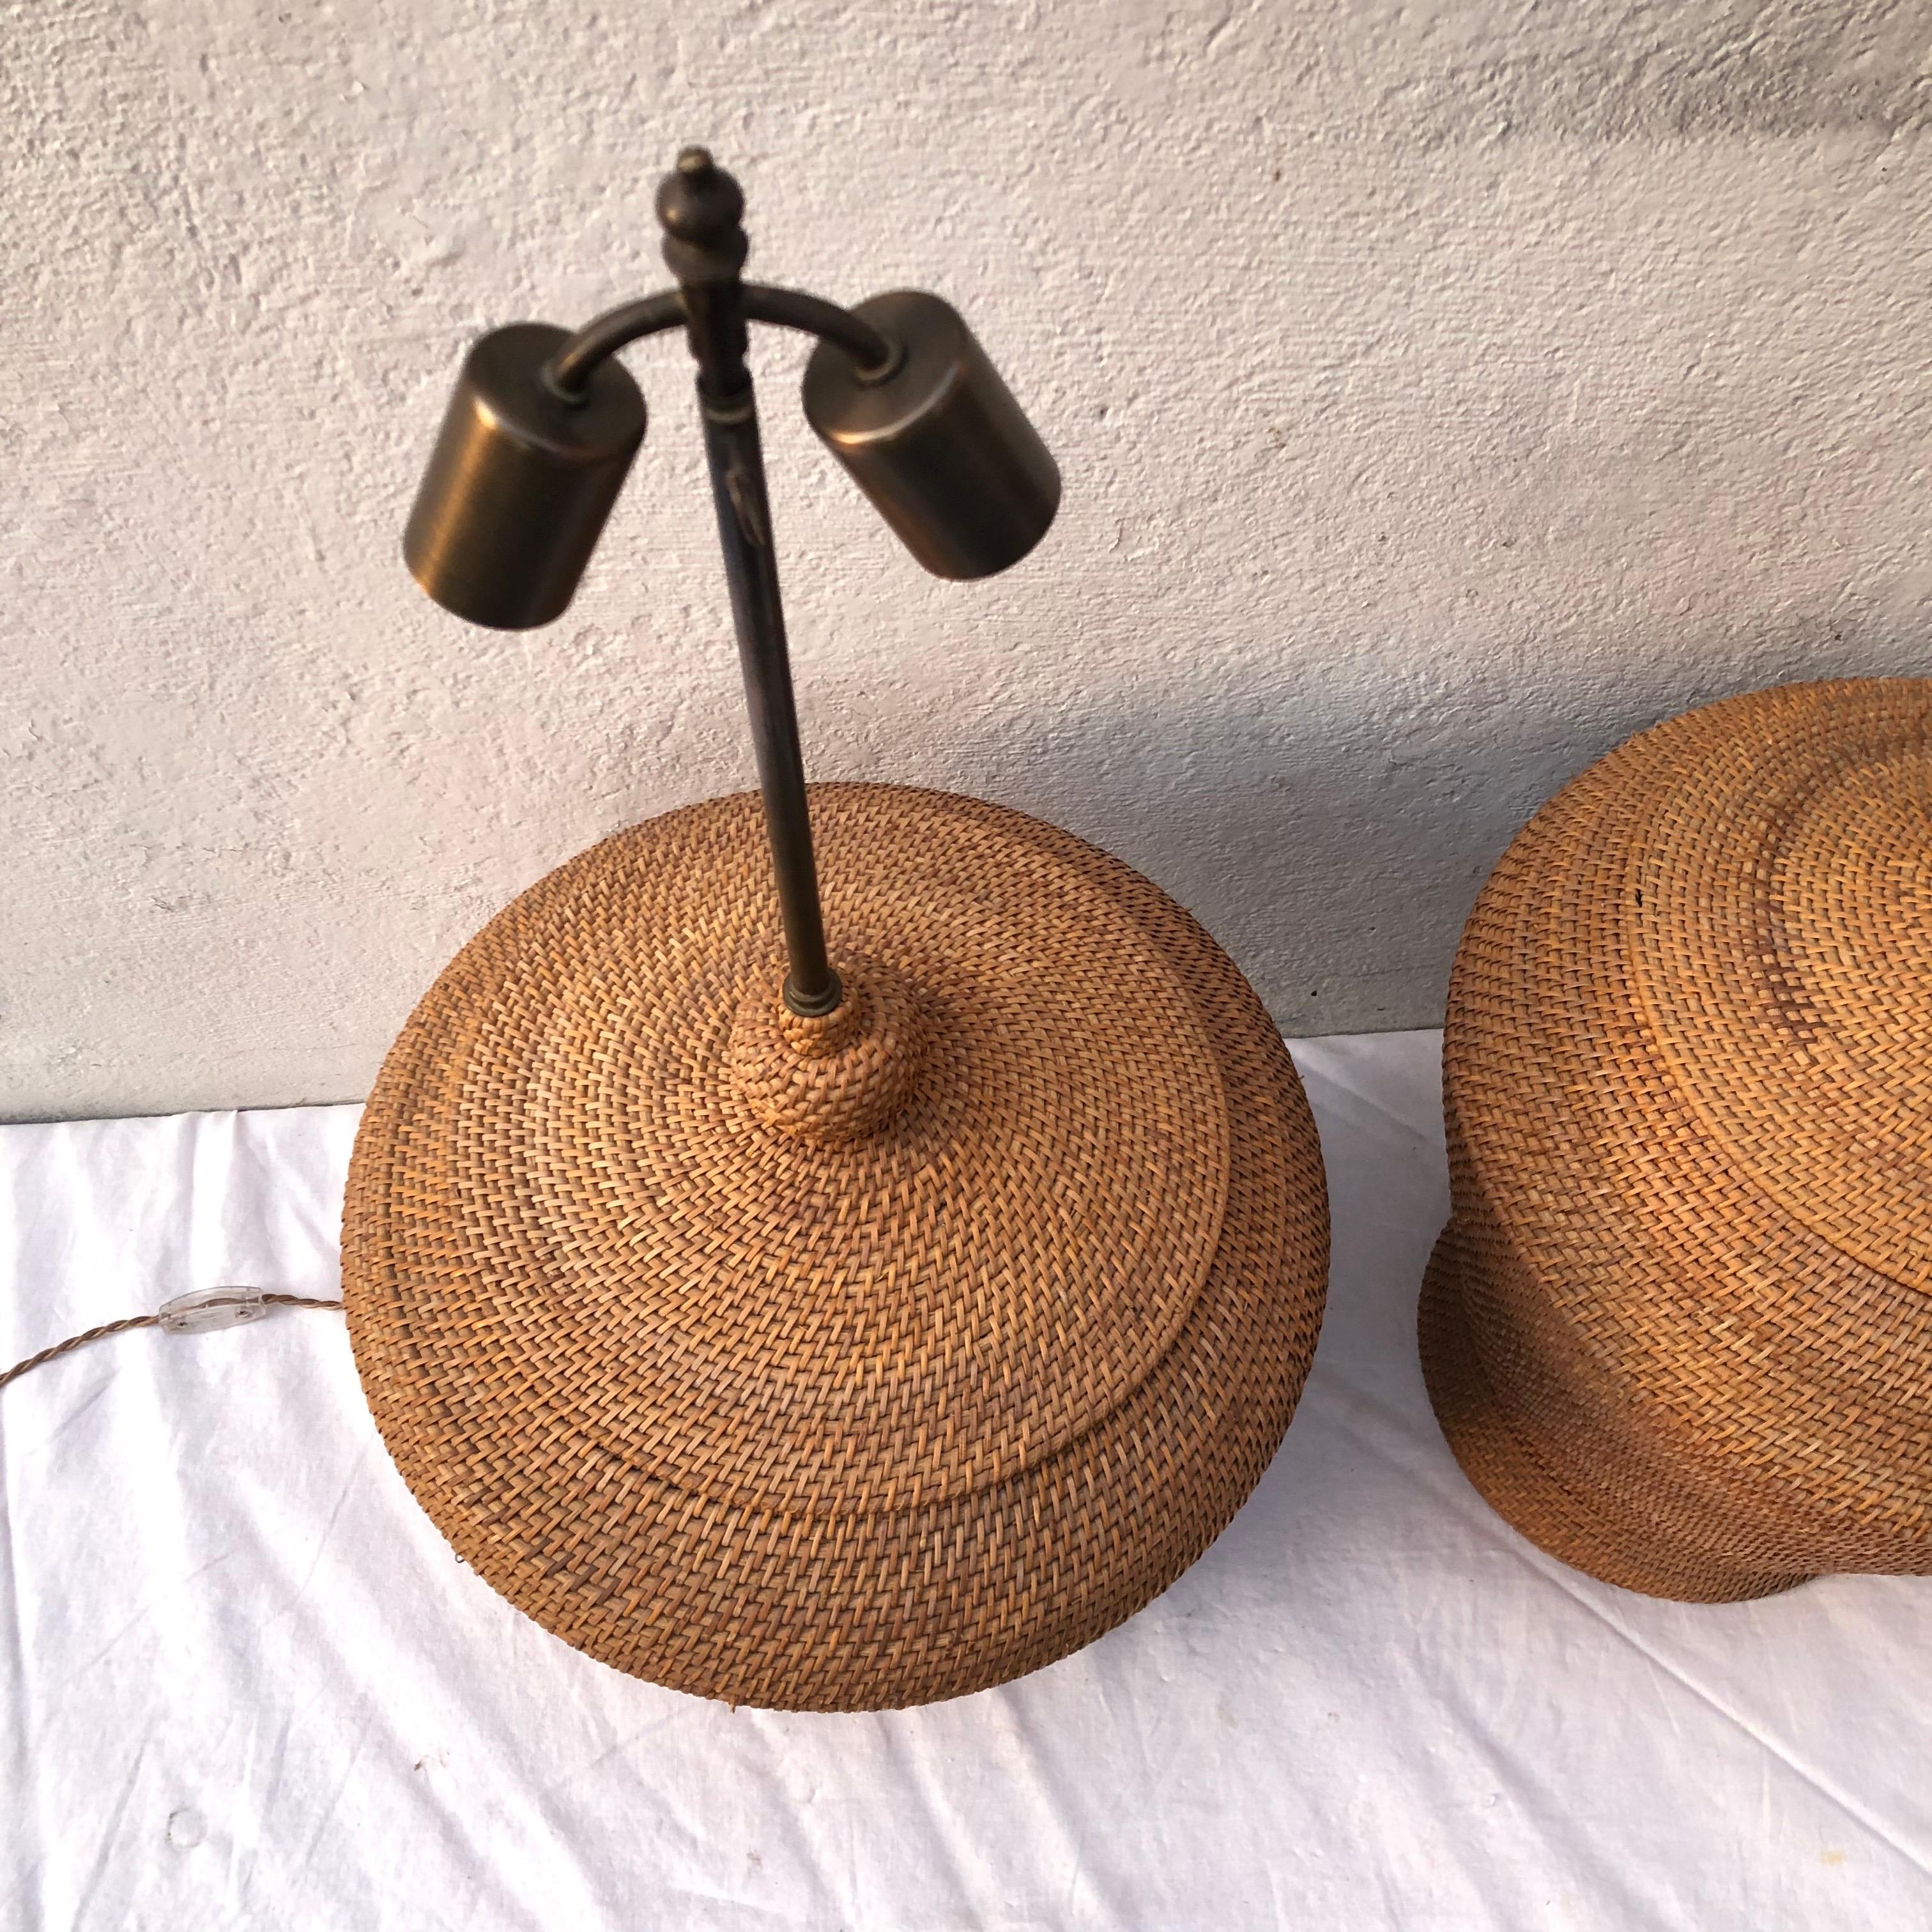 Pair of oversize basket weave rattan lamps

Adjustable height from 36-45.